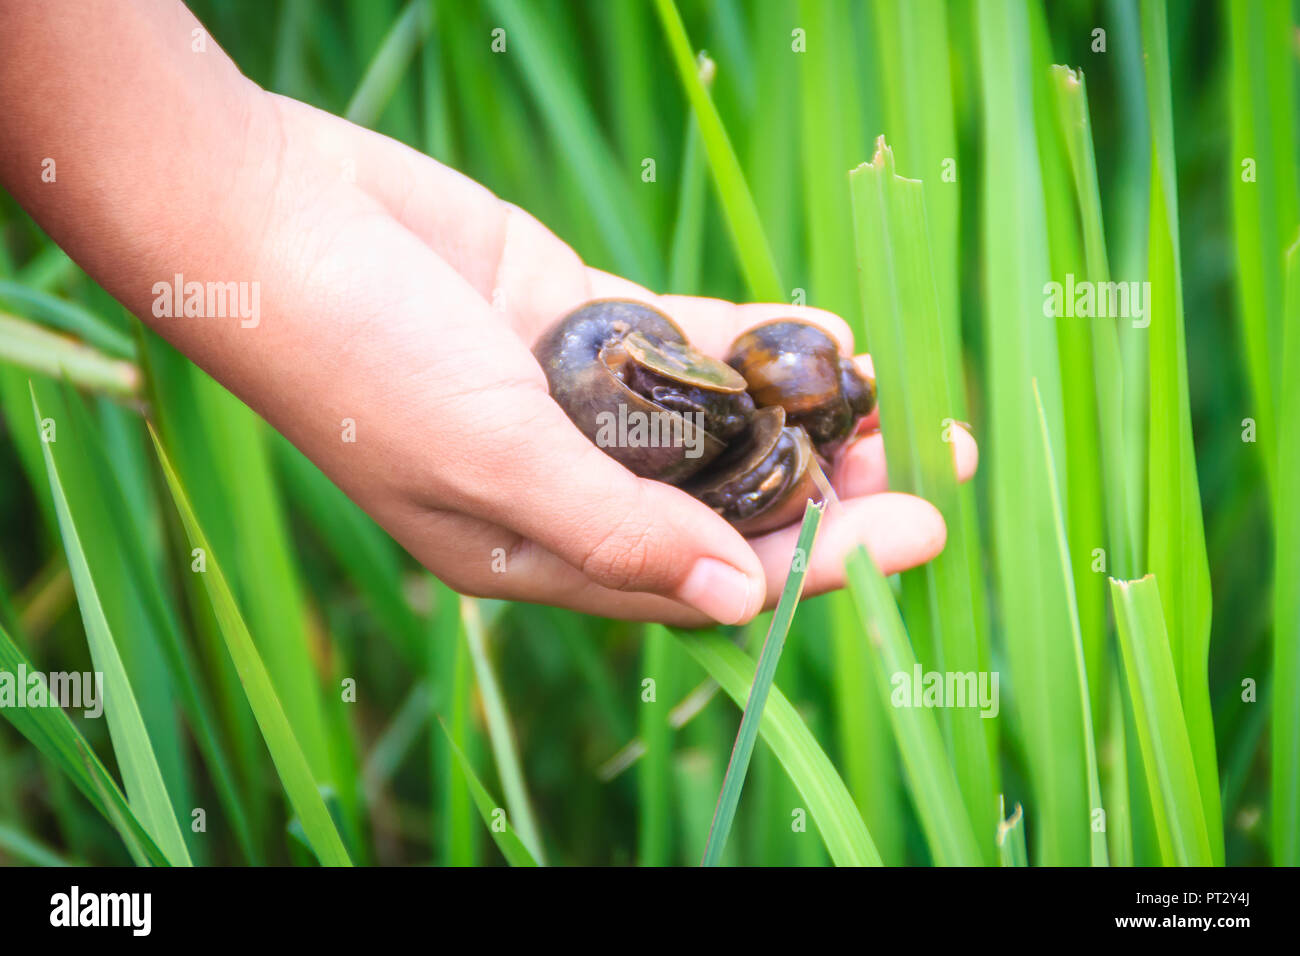 Golden applesnail or Channeled applesnail (Pomacea canaliculata) is picked by hand with the green rice field background. It is alien freshwater mollus Stock Photo